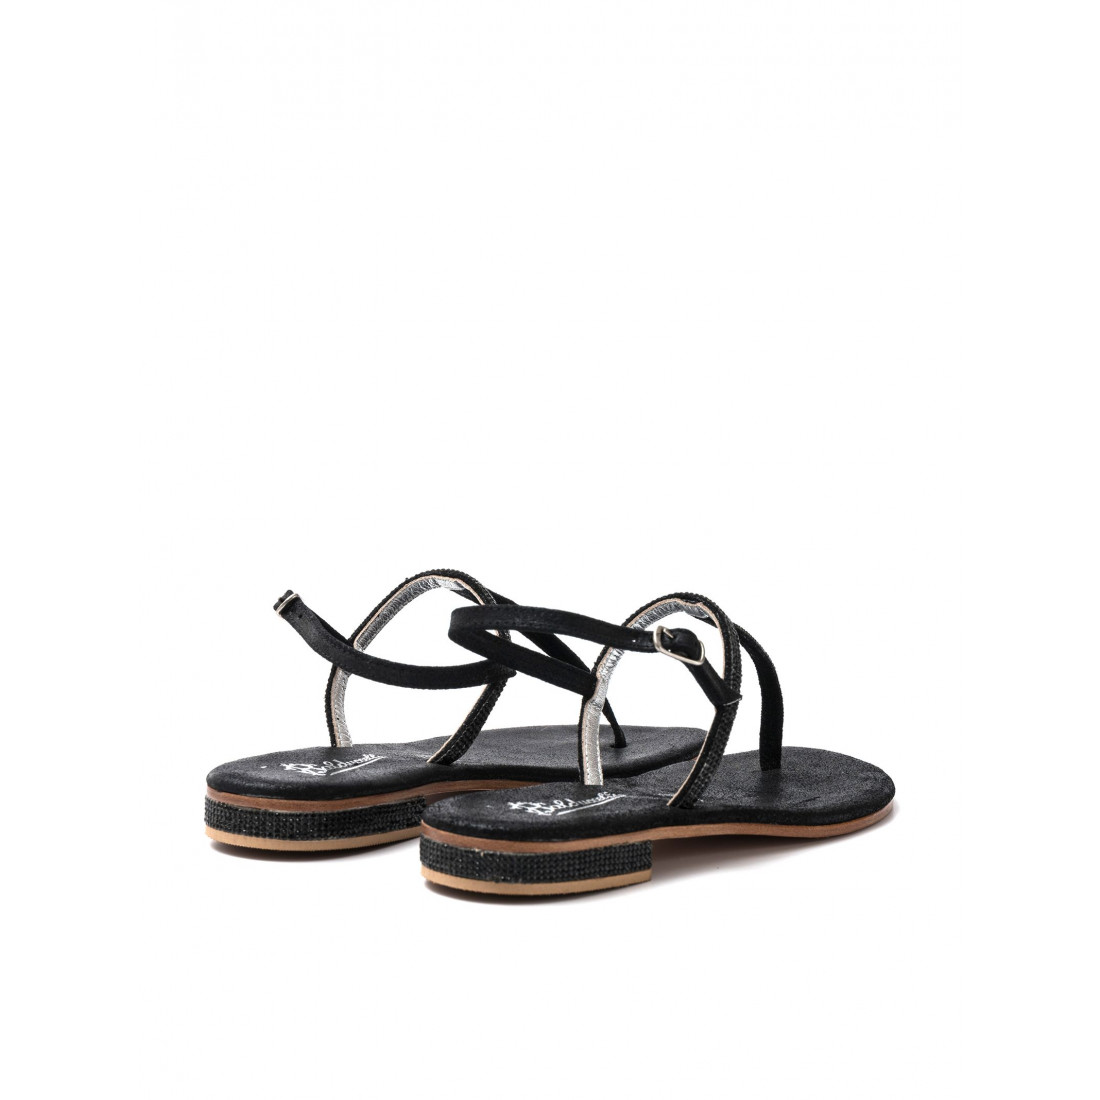 FLIP FLOP SANDALS IN LEATHER WITH STRASS